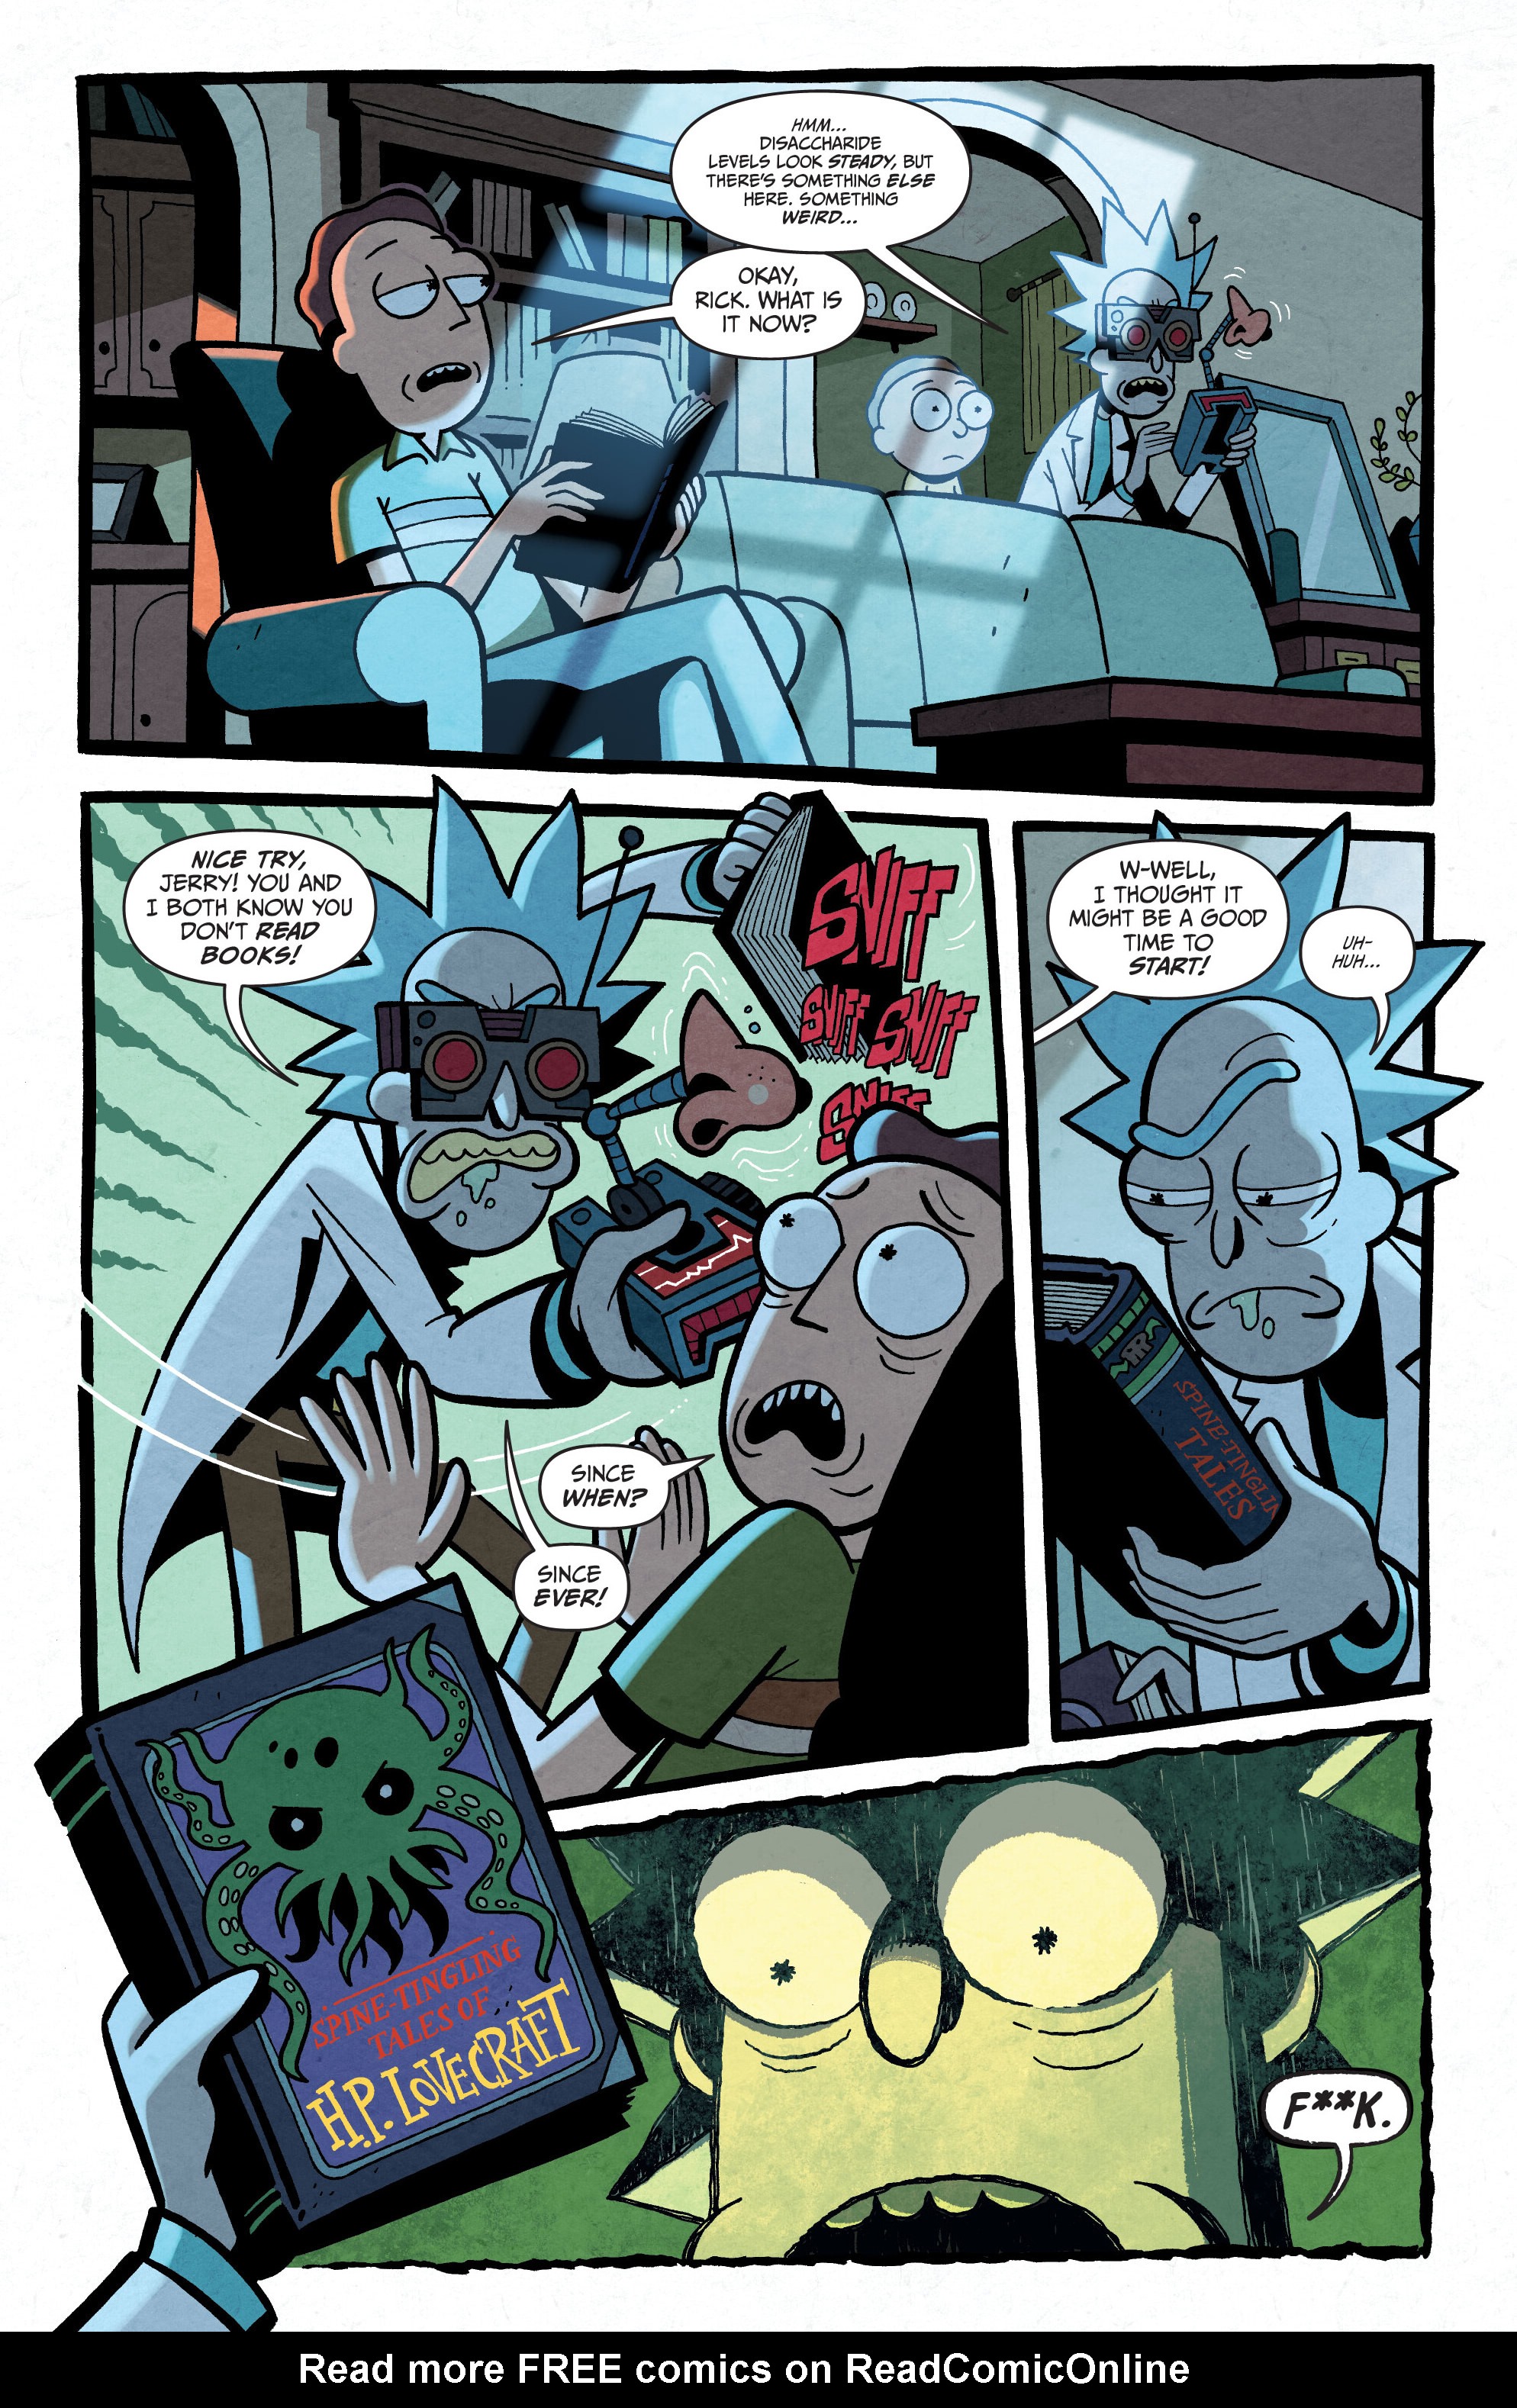 Read online Rick and Morty: vs. Cthulhu comic -  Issue # TPB - 10